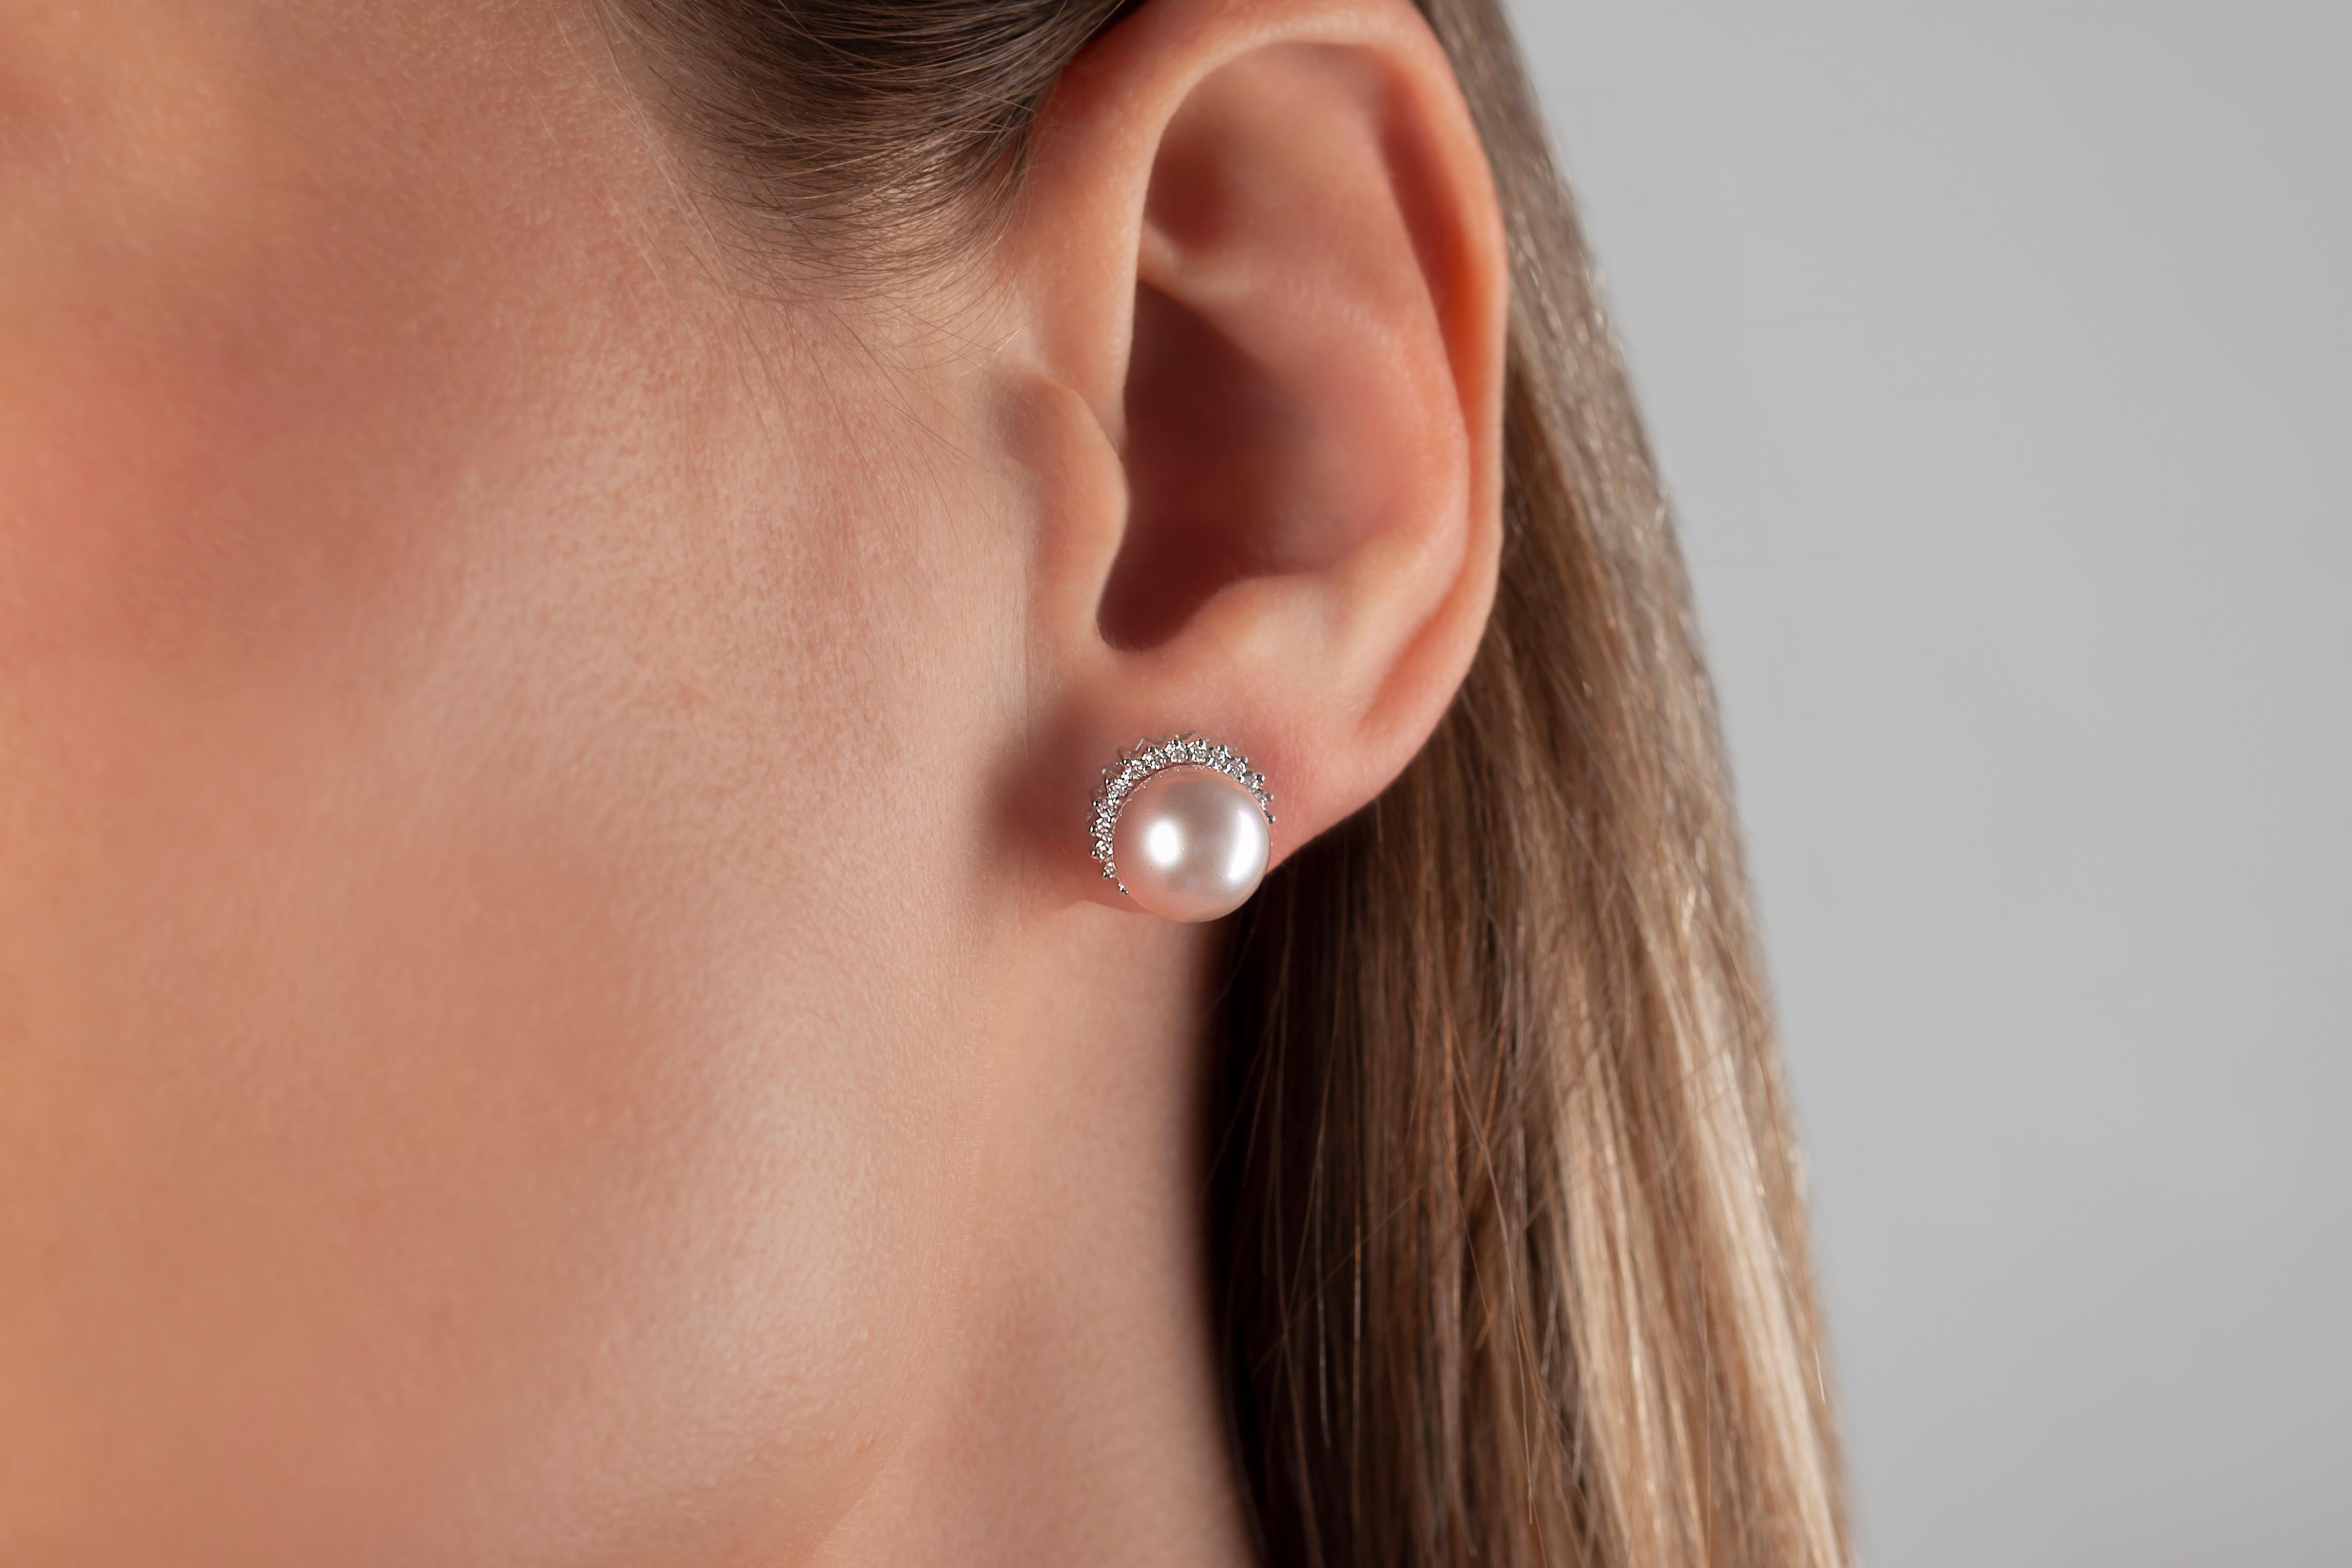 These earrings by Yoko London offer a subtle twist on a classic design. Featuring soft pink Freshwater pearls surrounded by a diamond halo, these pretty earrings will add a touch of elegance to any outfit. A fantastic addition to any jewellery box,